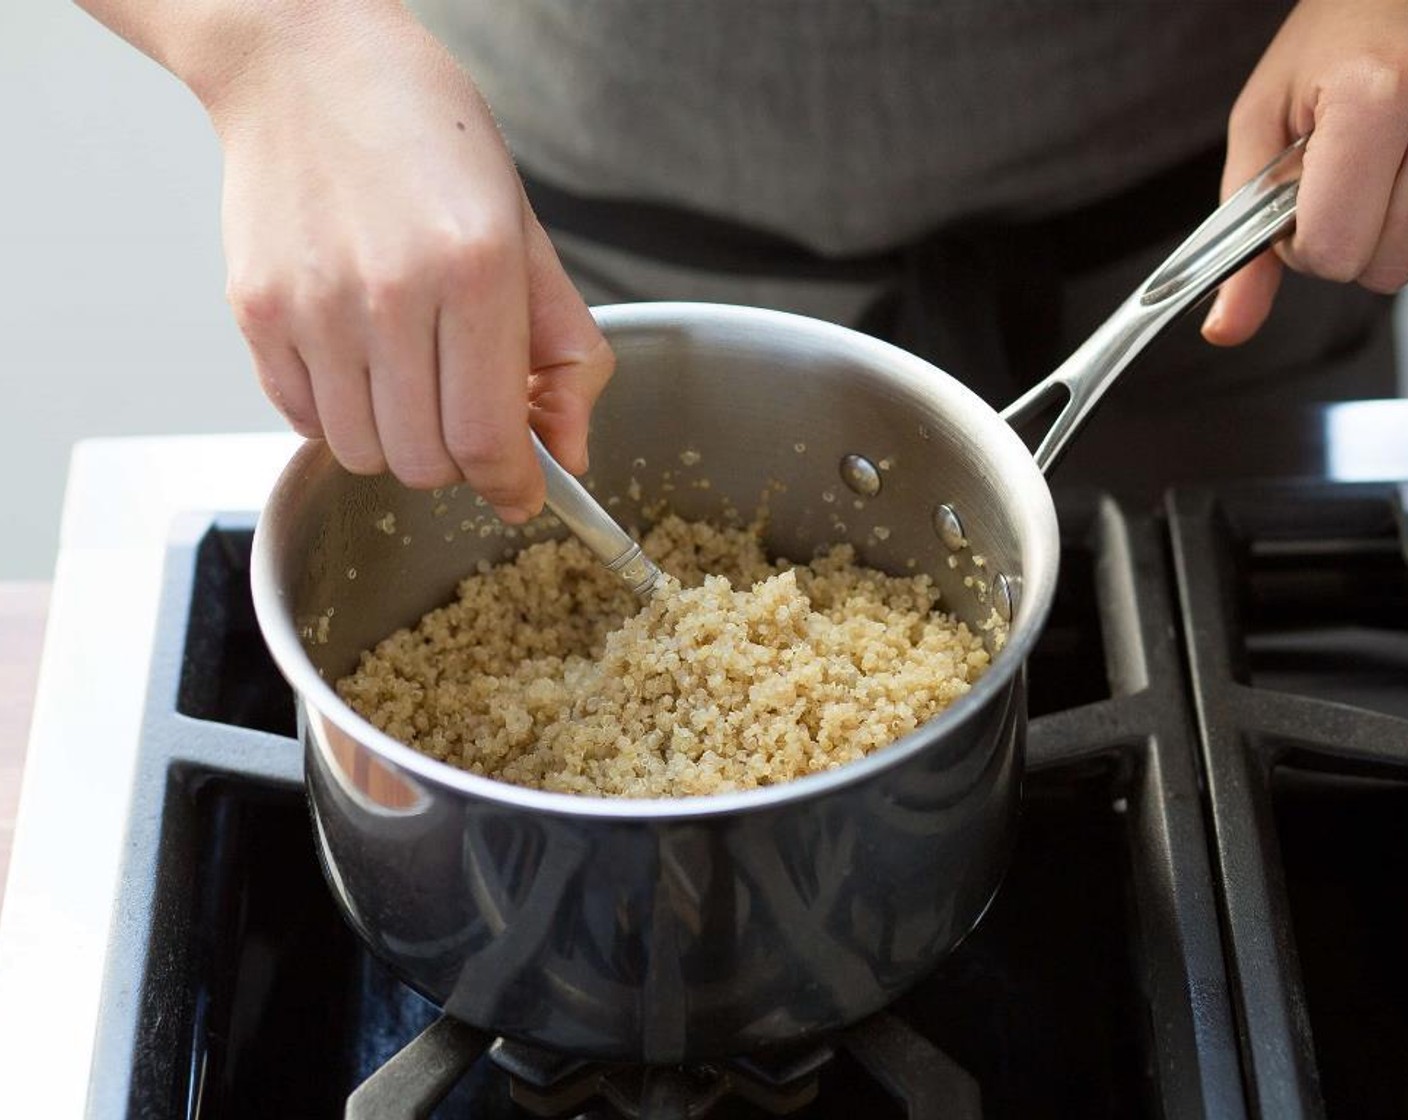 step 2 Add Water (1 1/2 cups) and bring to a boil. Add Quinoa (2/3 cup), return to a boil. Reduce heat to low and cover and let simmer for 20 minutes. Remove from heat, fluff with a fork and keep warm until plating.